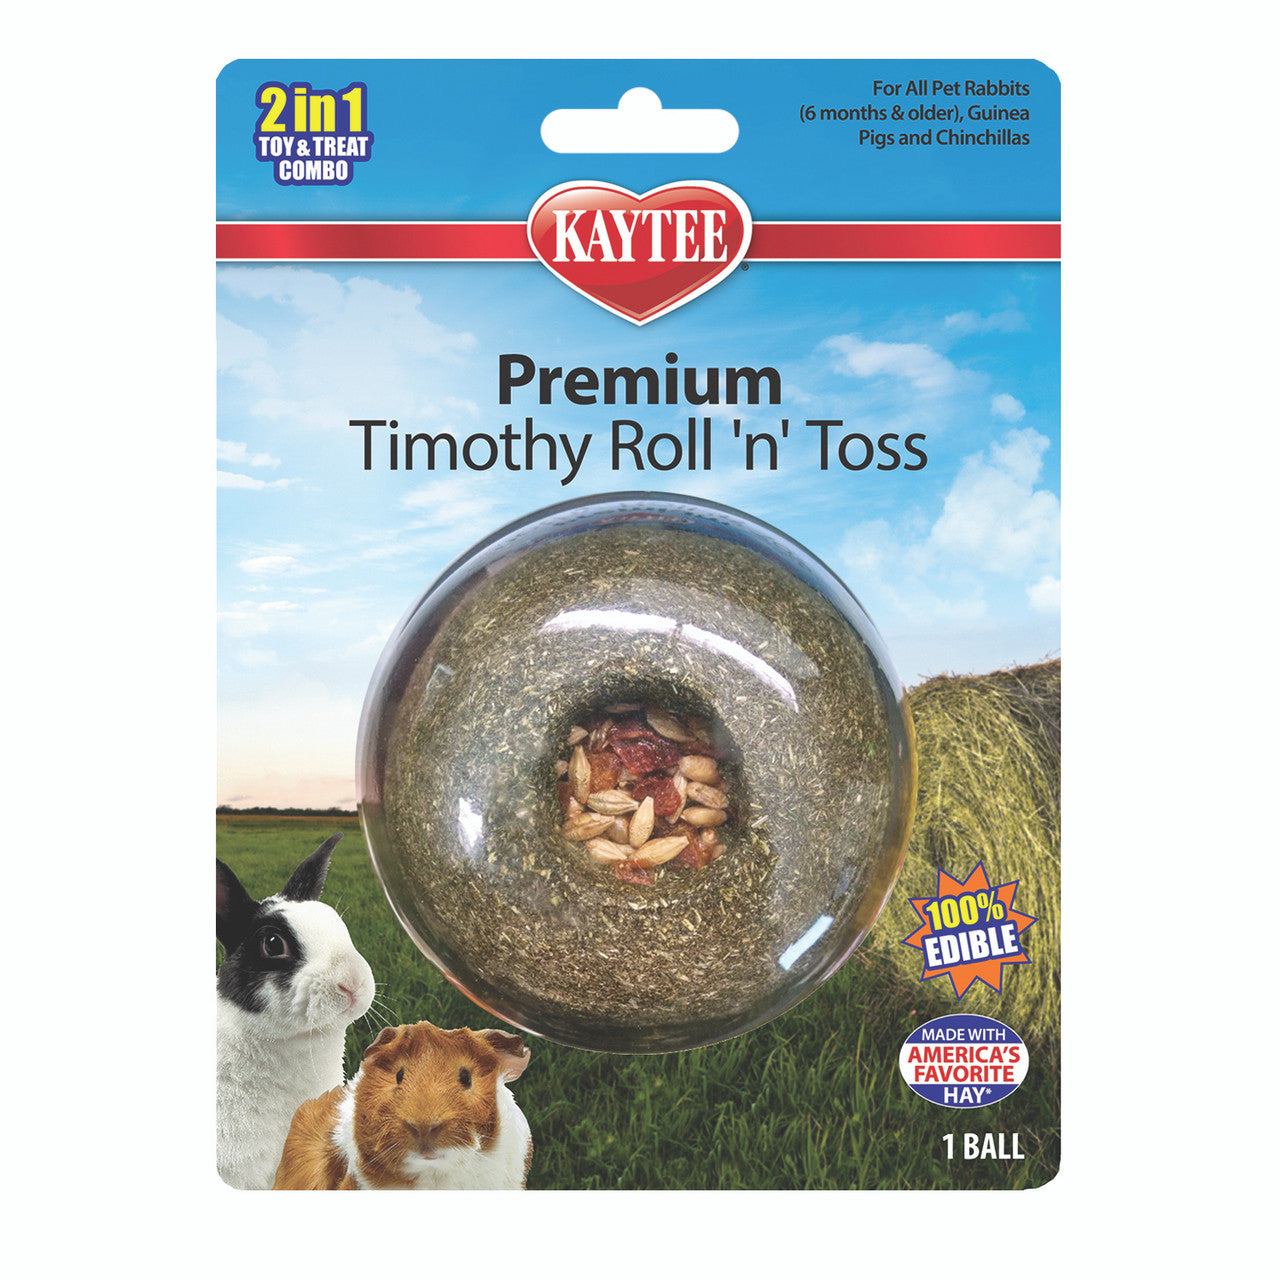 Kaytee Timothy Roll n Toss Toy and Treat